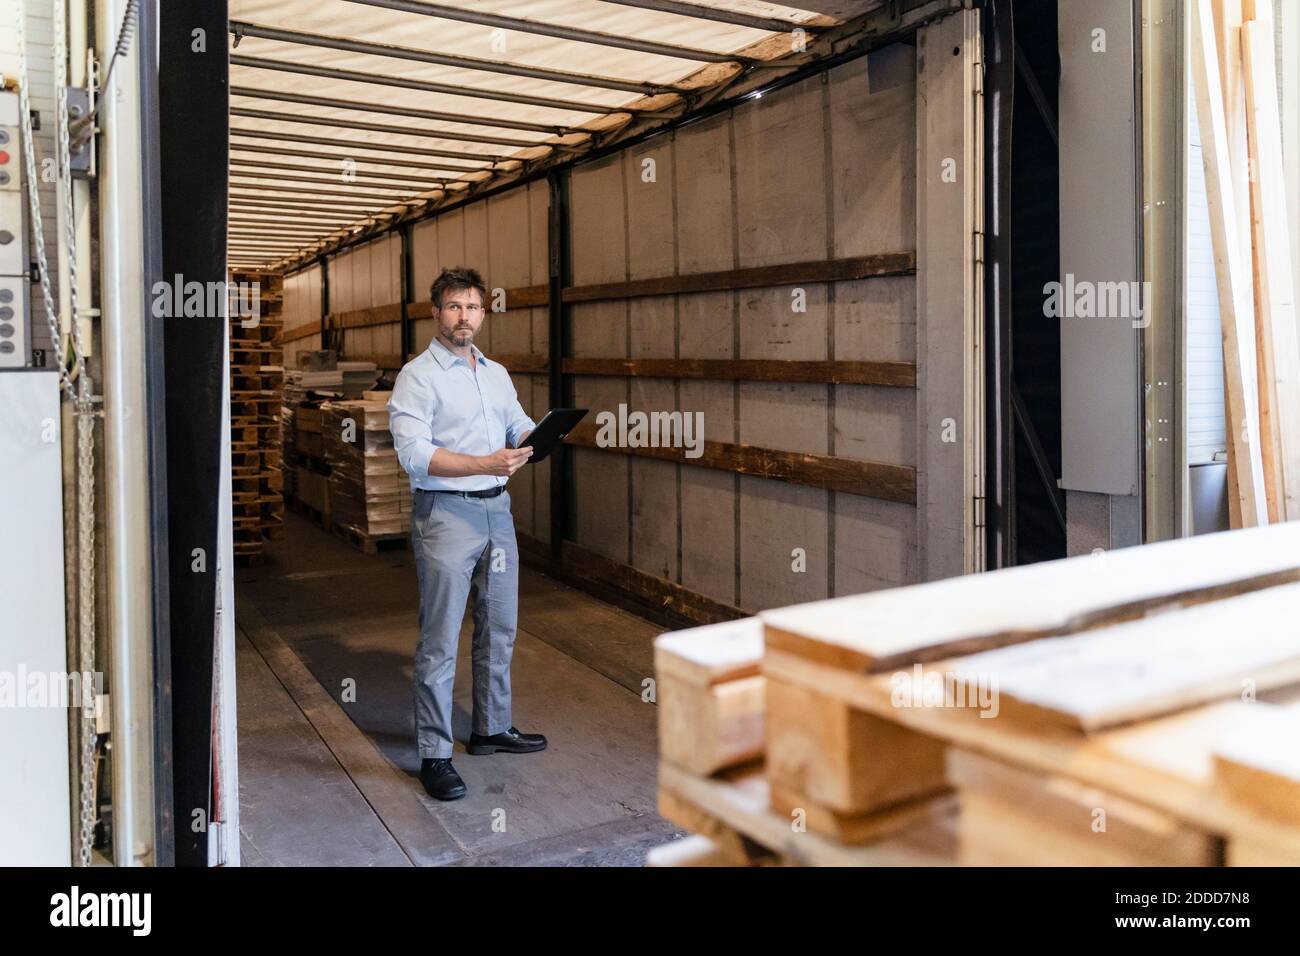 Inspector with digital tablet loading material while standing in delivery truck Stock Photo